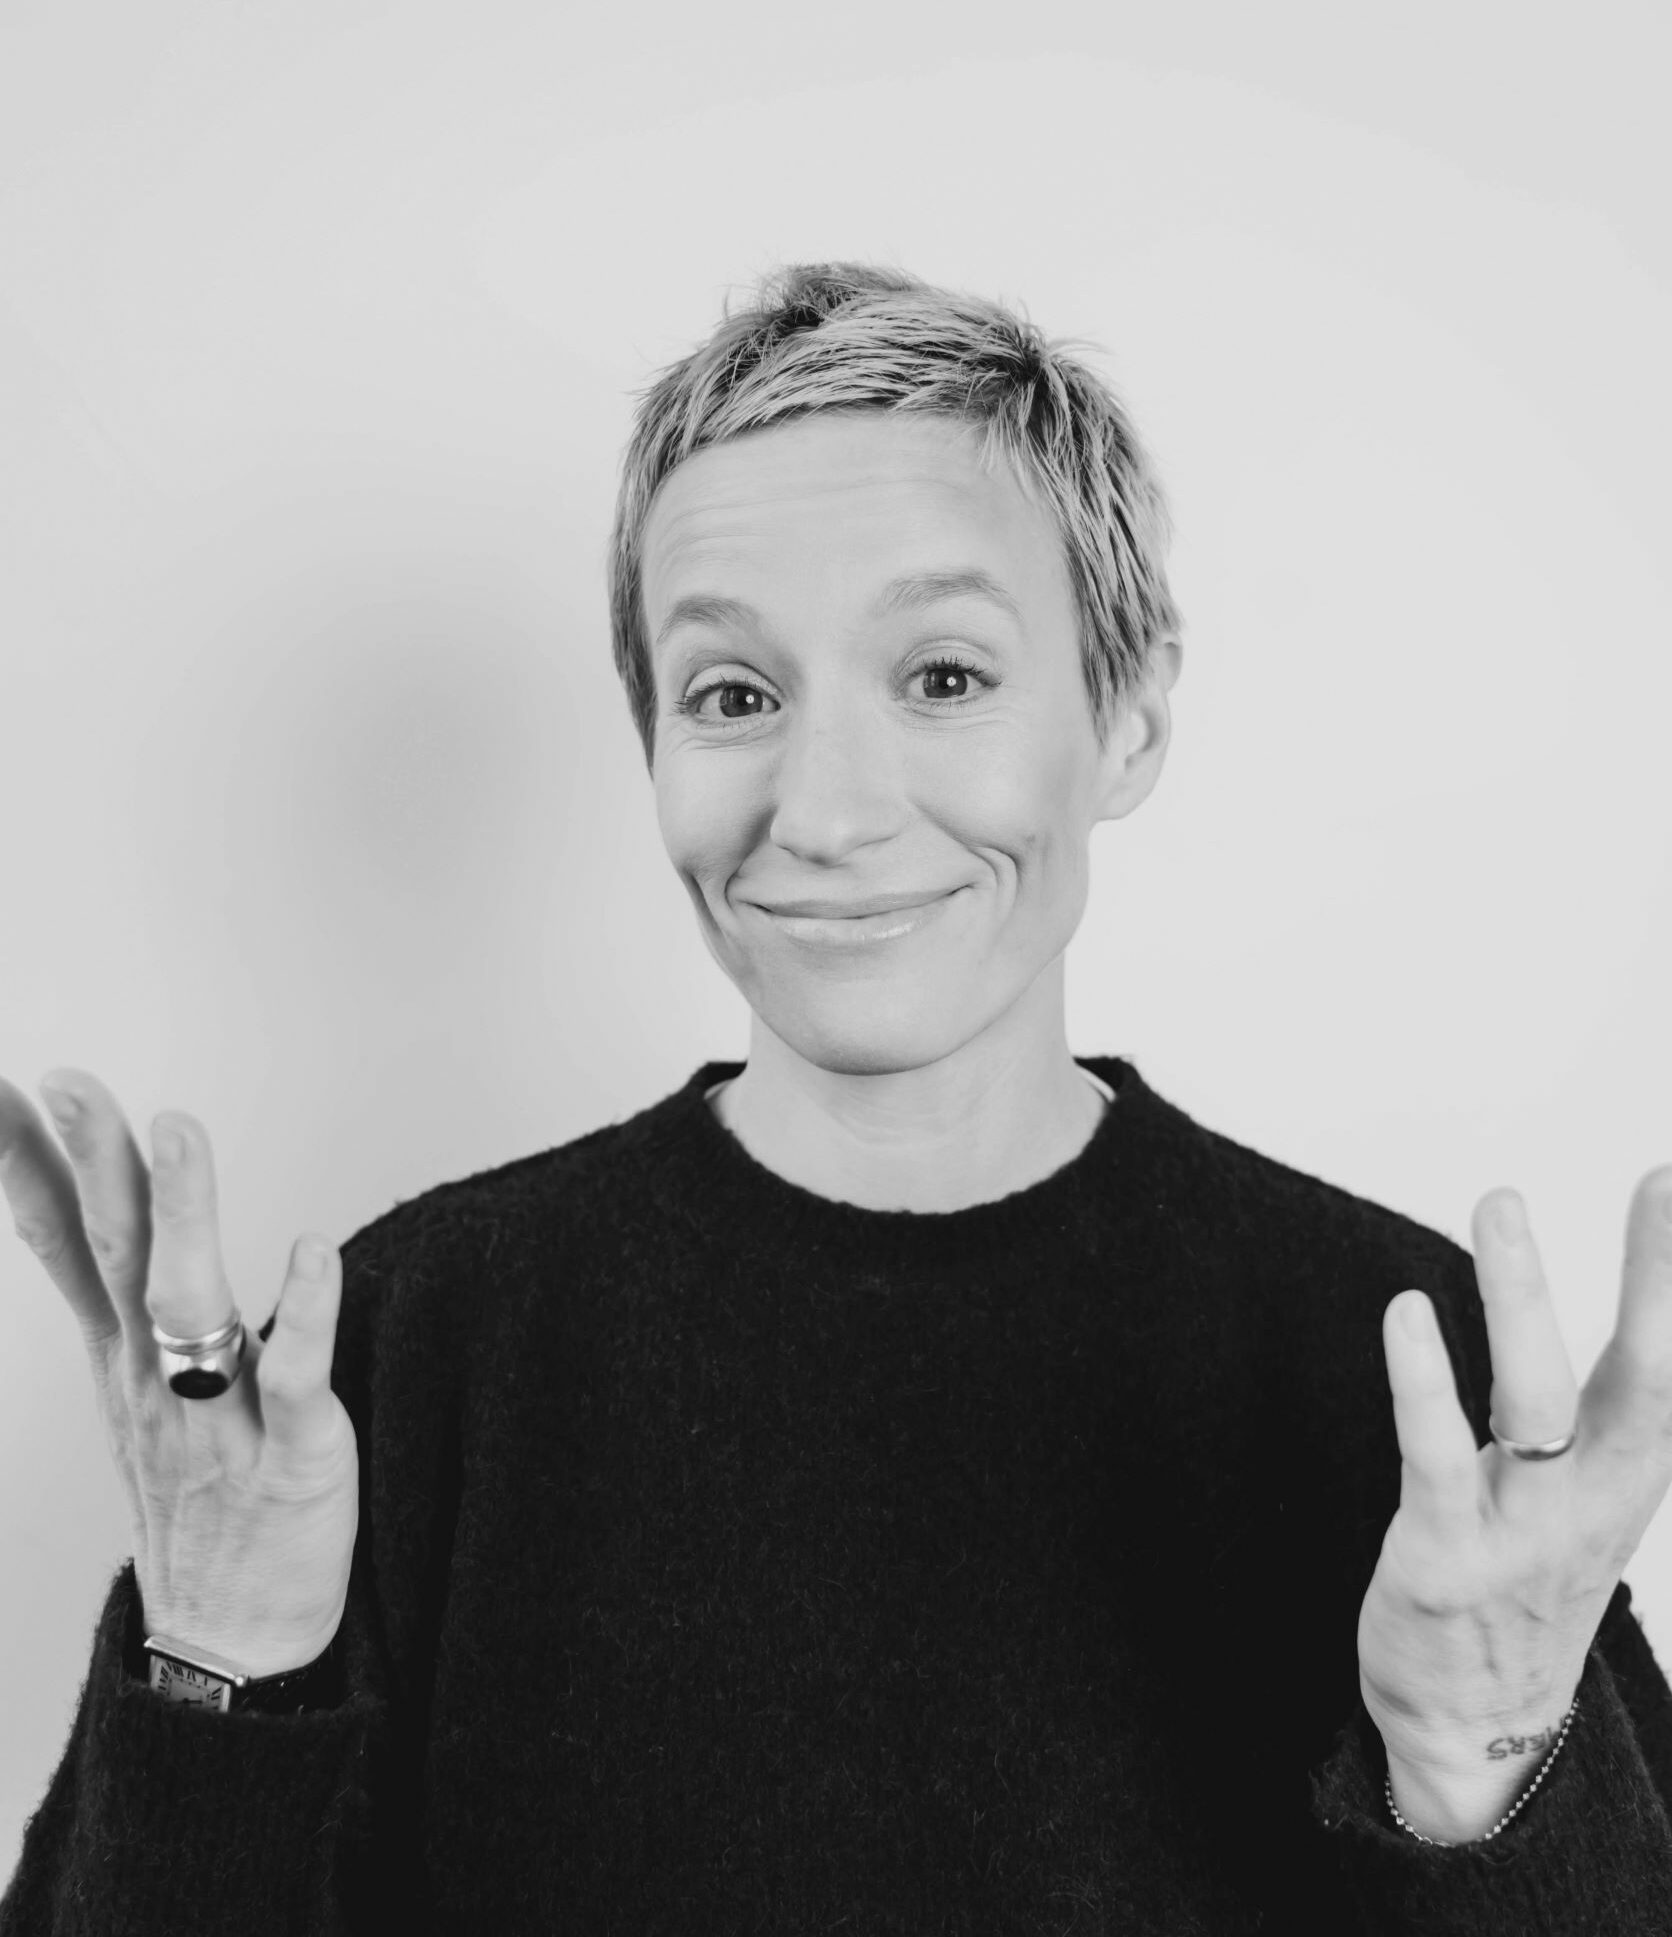 Headshot of Megan Rapinoe with arms lifted in subtle humor.